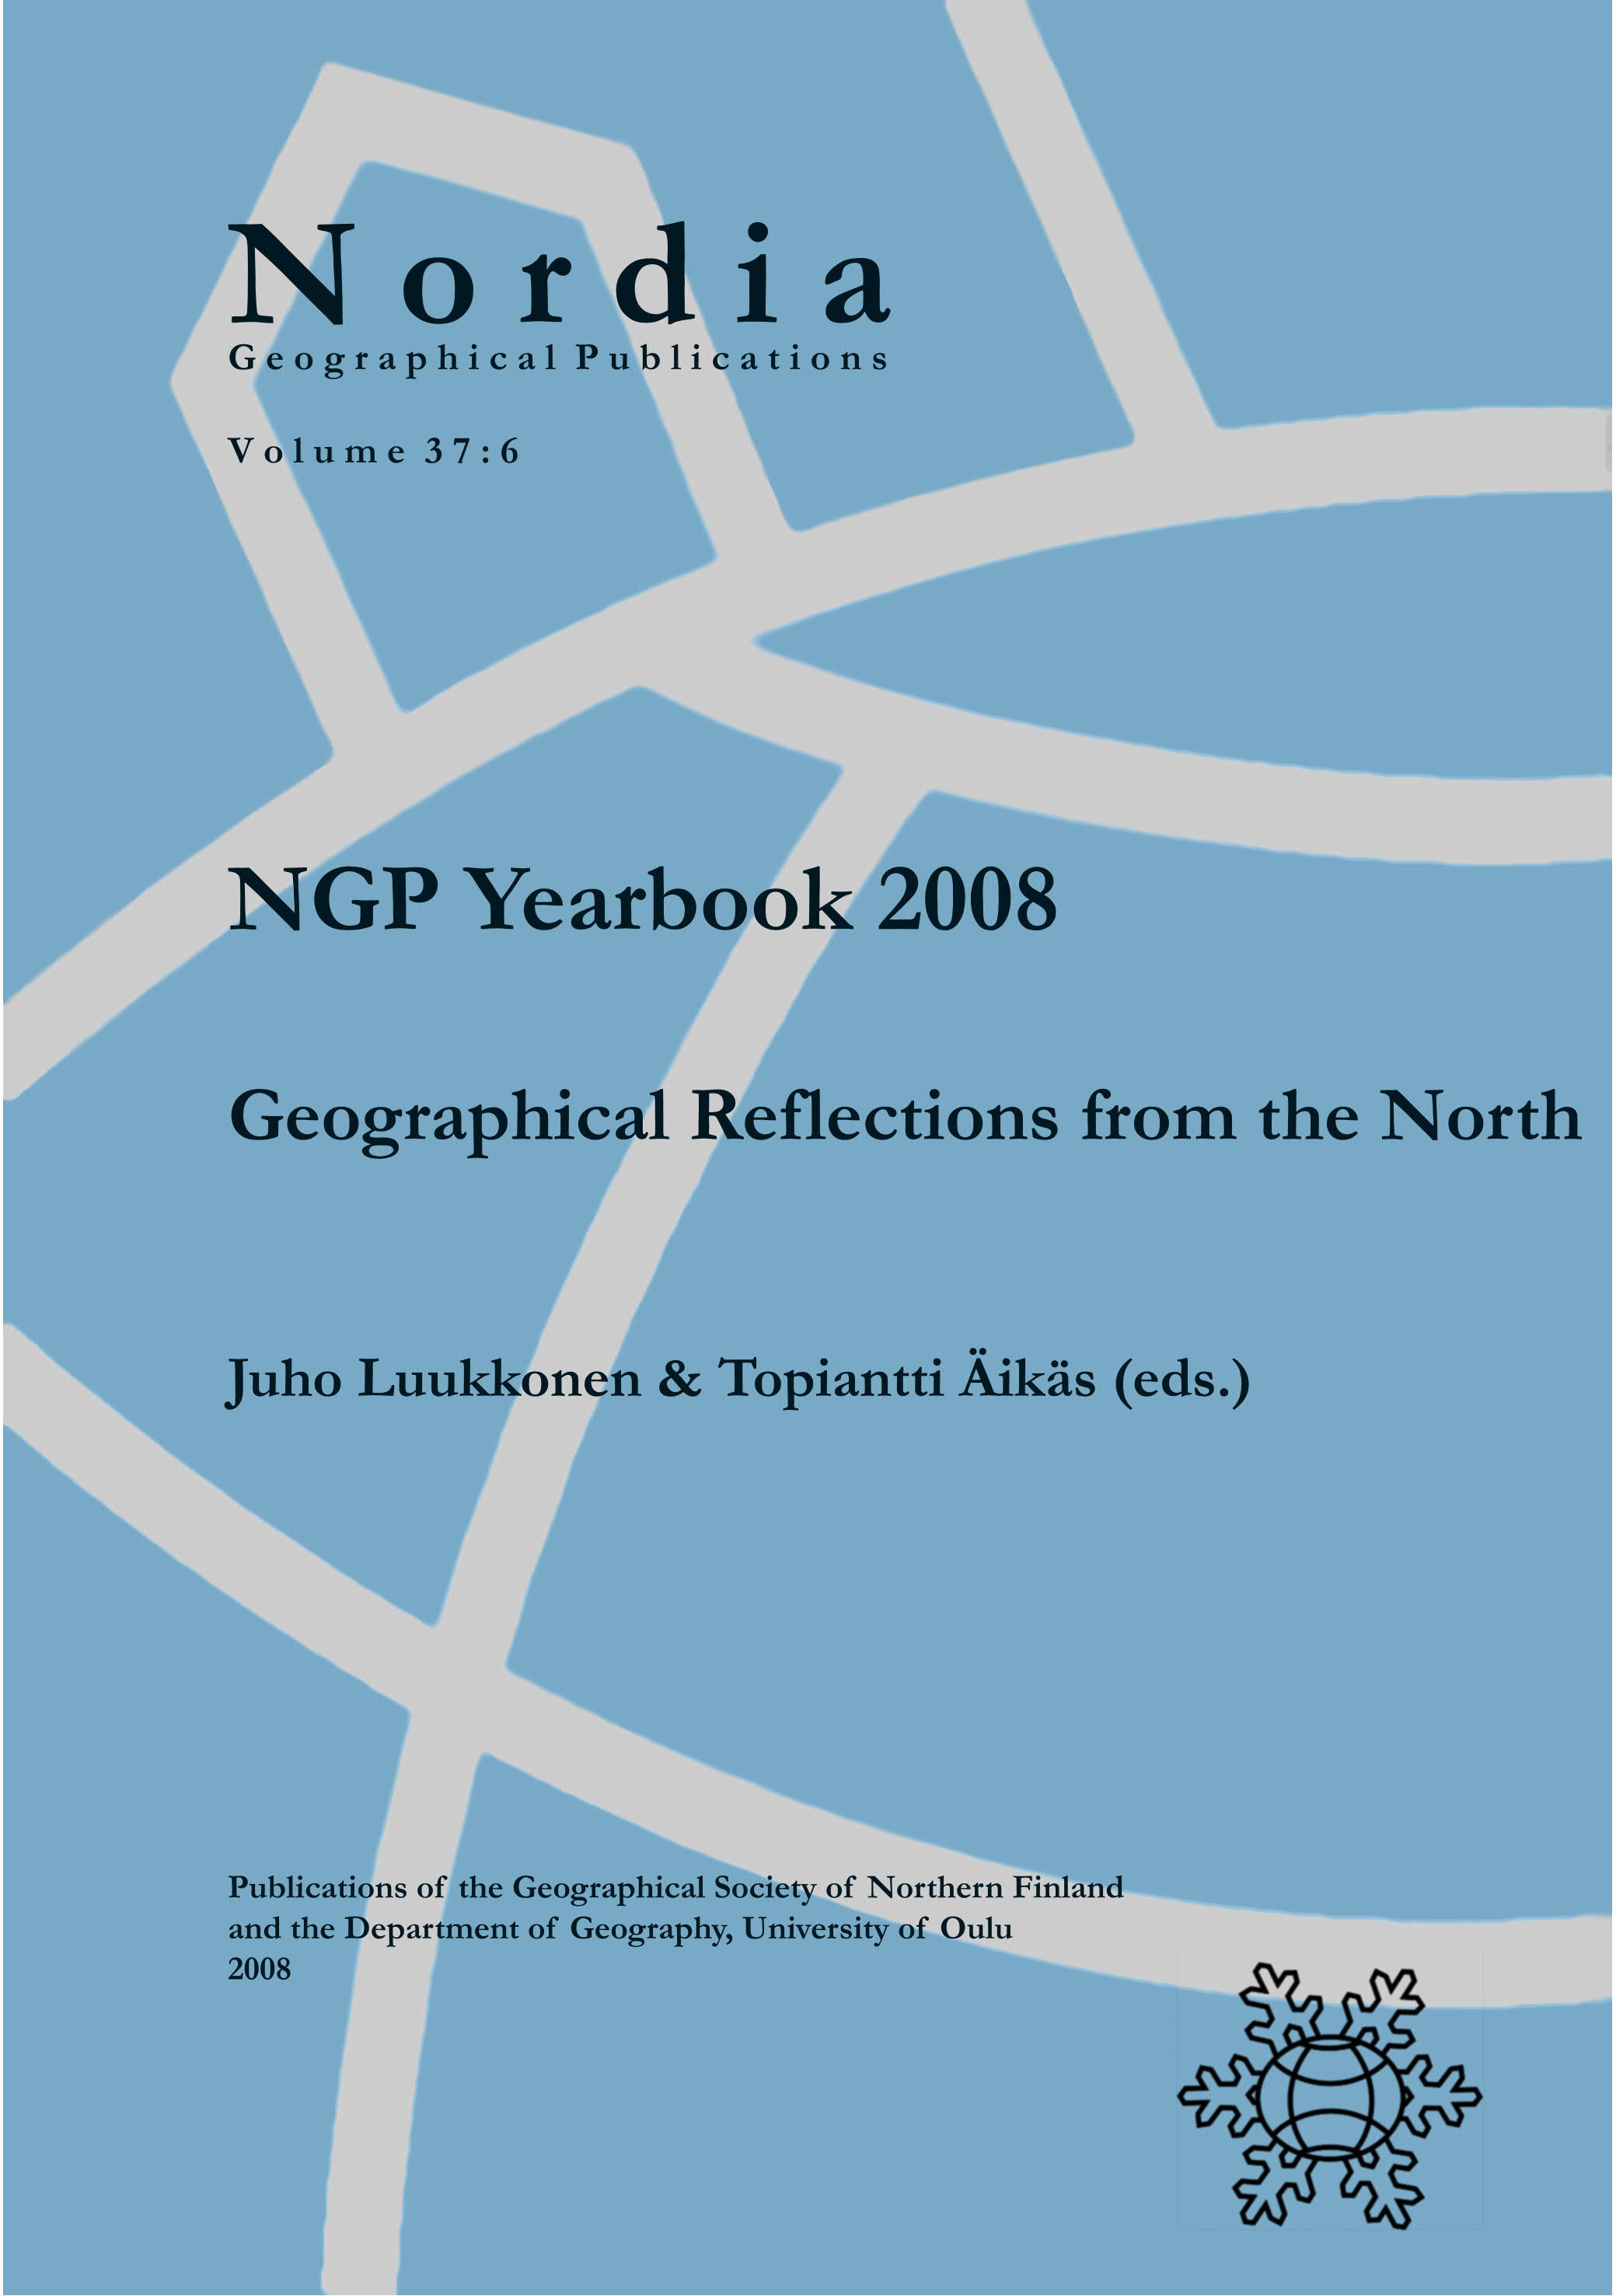 					View Vol. 37 No. 6: NGP Yearbook 2008: Geographical Reflections from the North
				